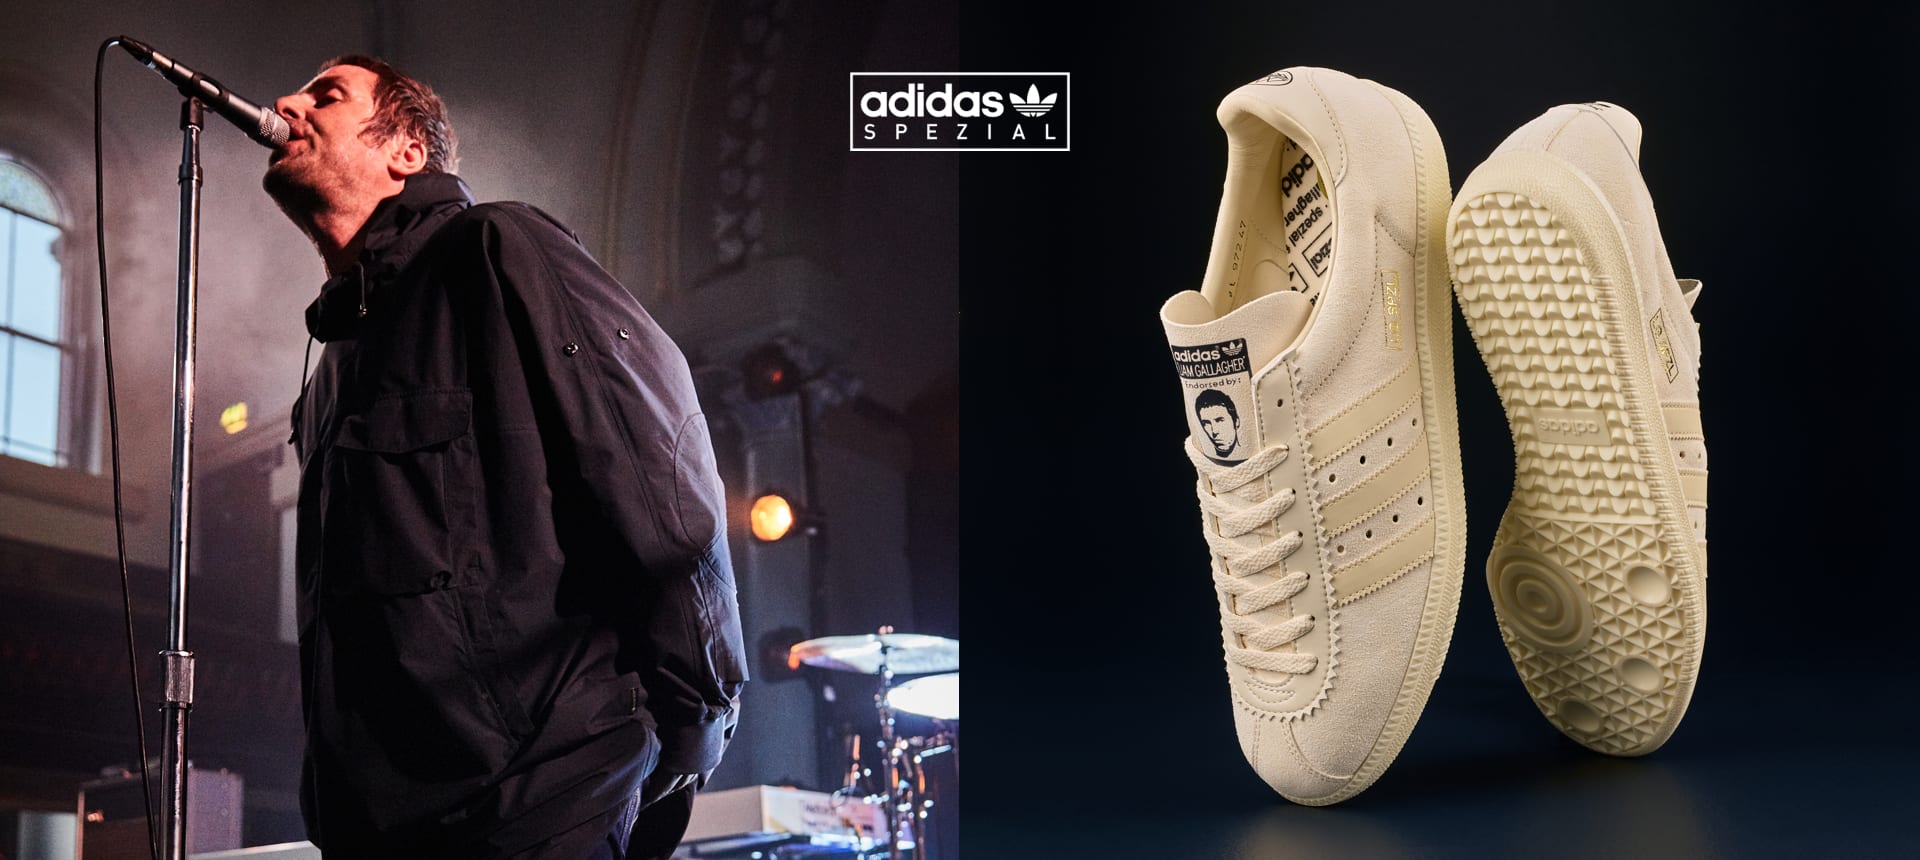 speler dichtheid hop Call Your Brother A Potato In Liam Gallagher's New Adidas Sneakers